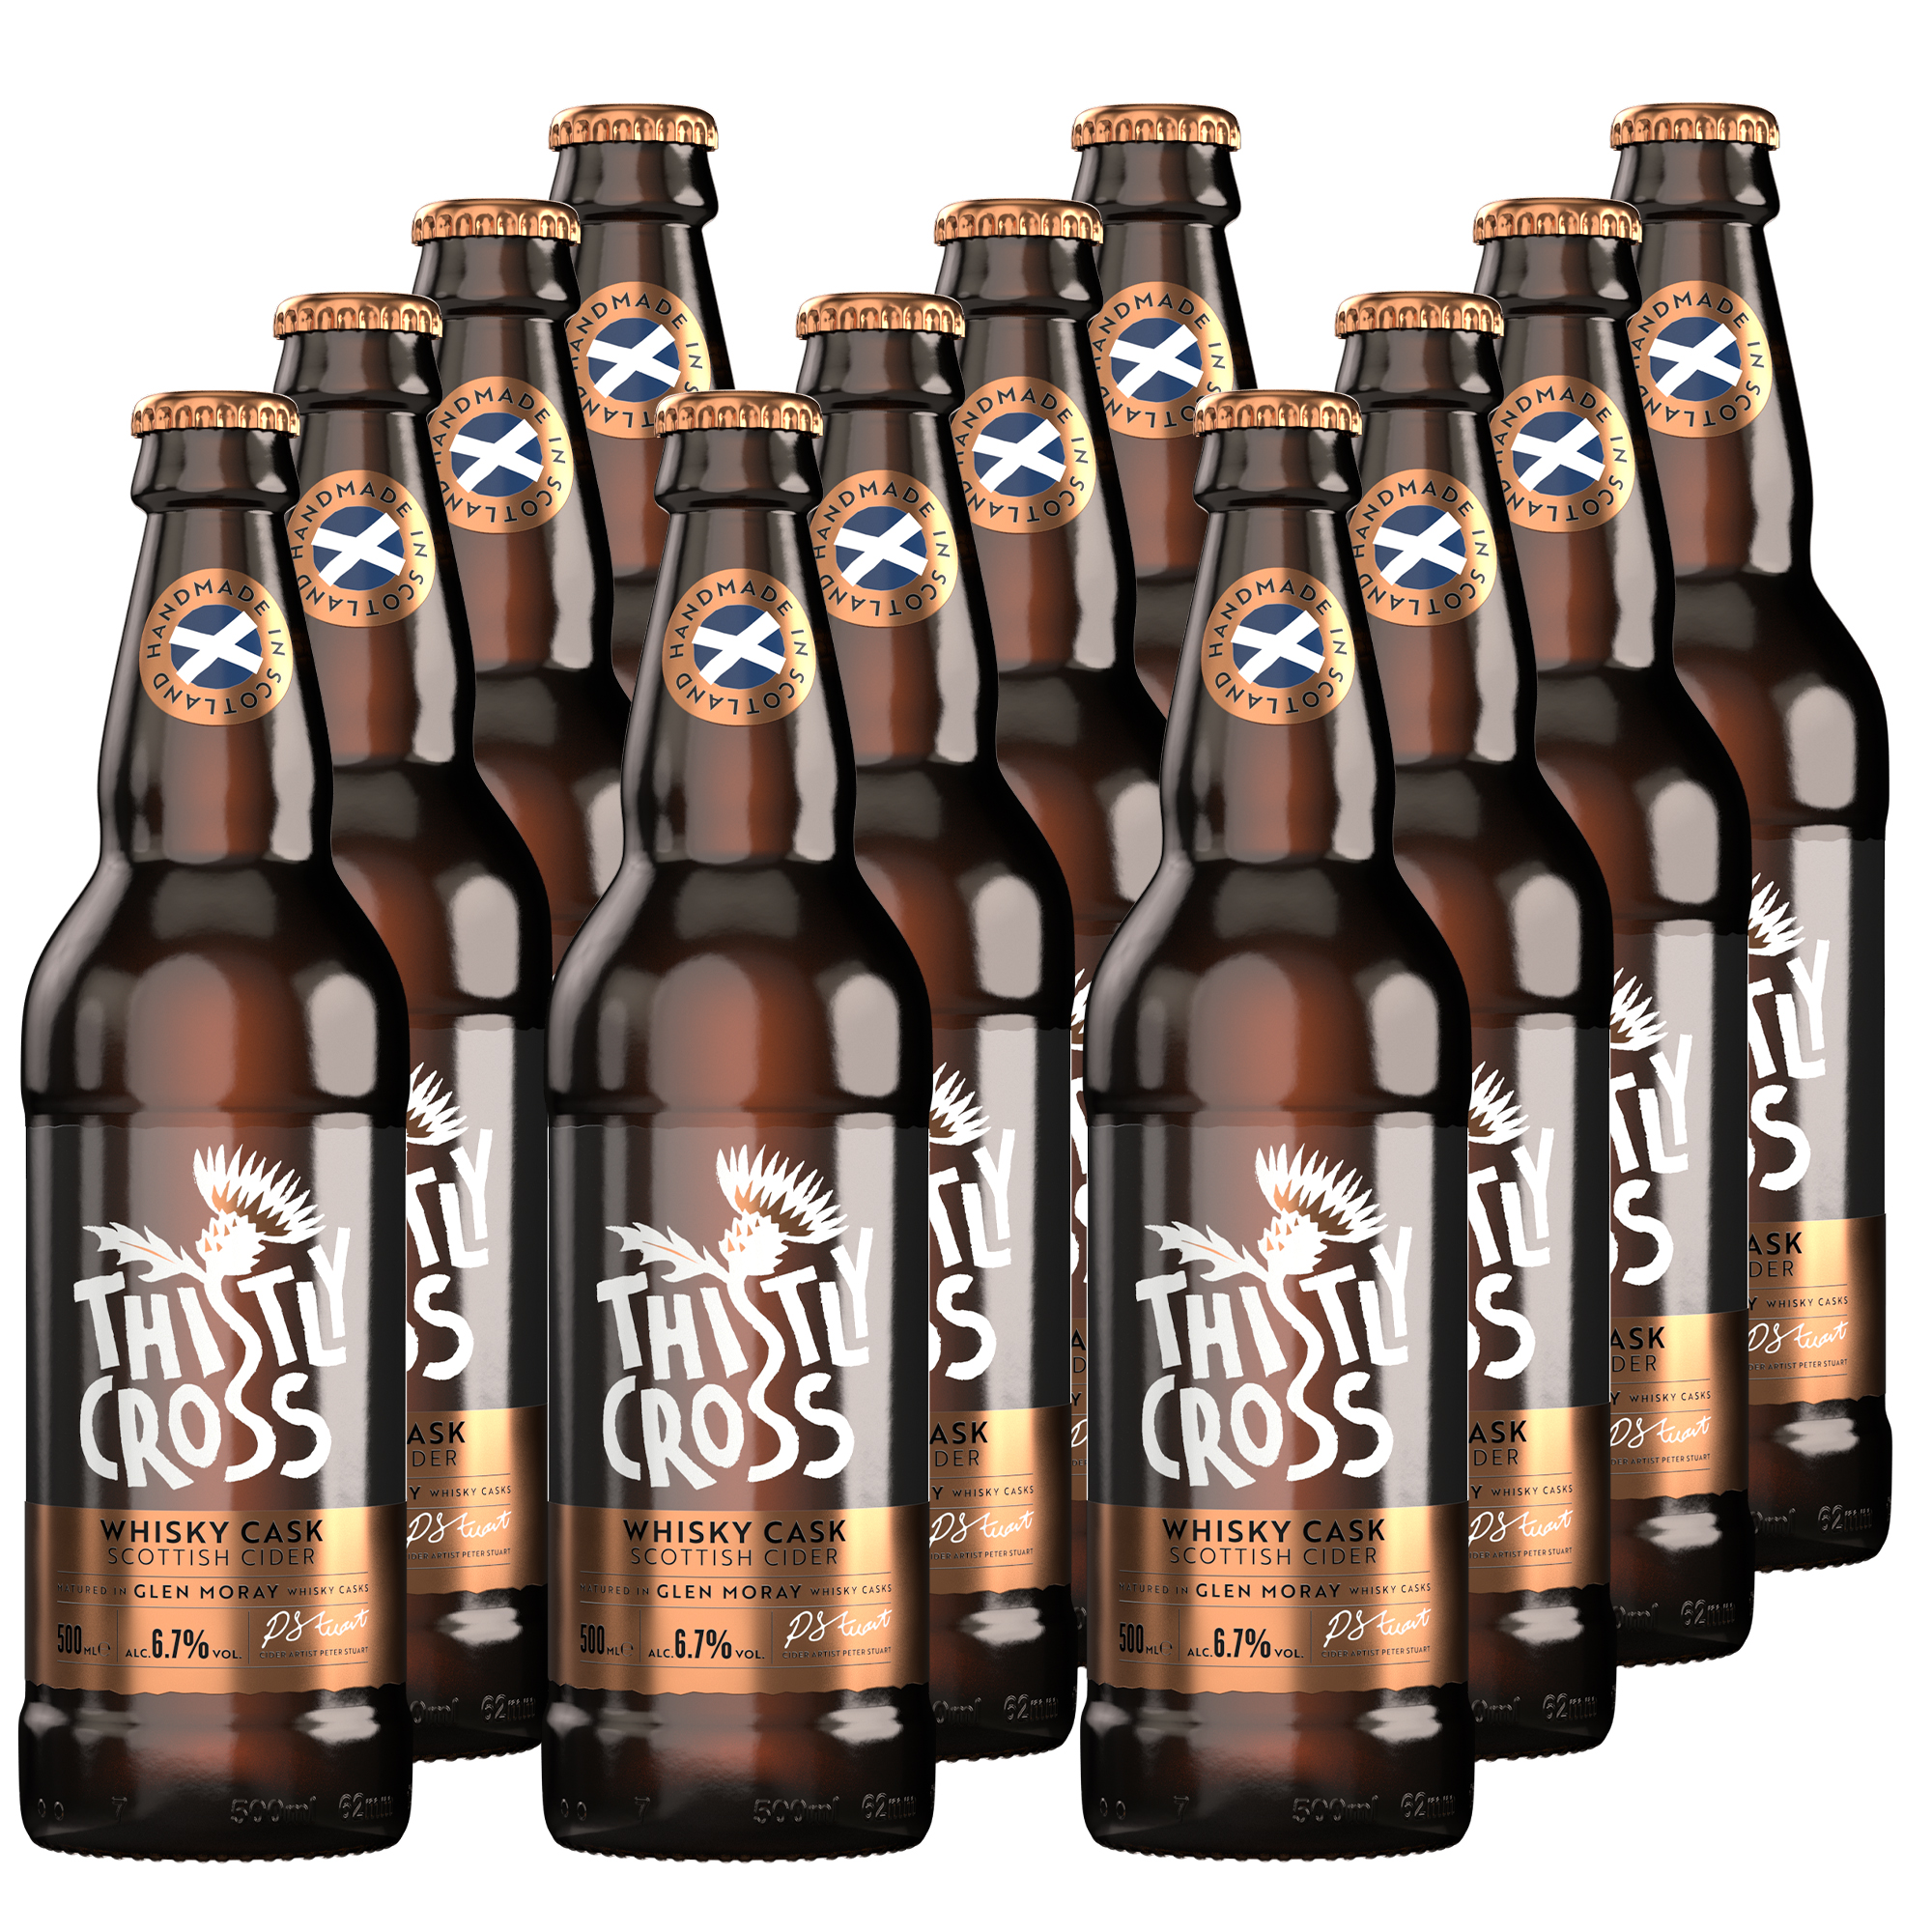 Thistly Cross Whisky Cask Cider 12x500ml